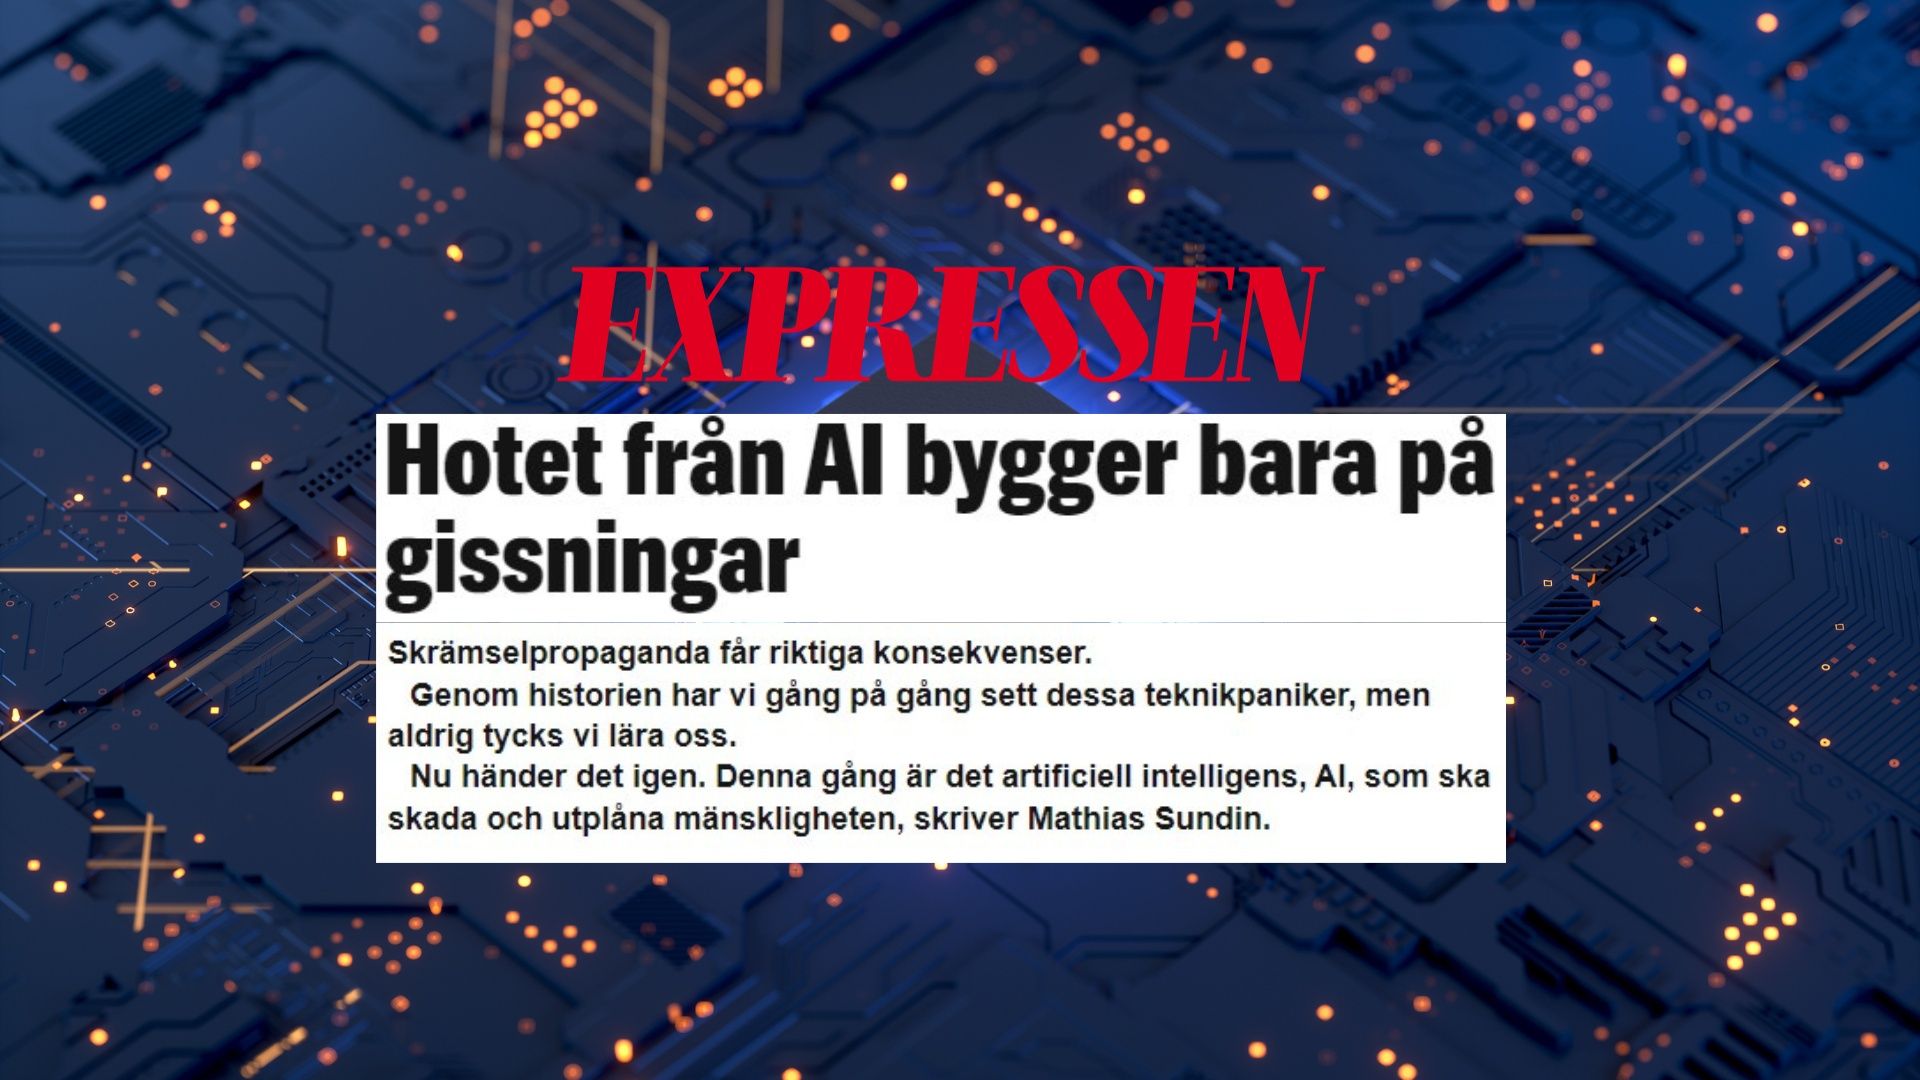 🤖 Op-ed in Expressen about the AI Safety Summit